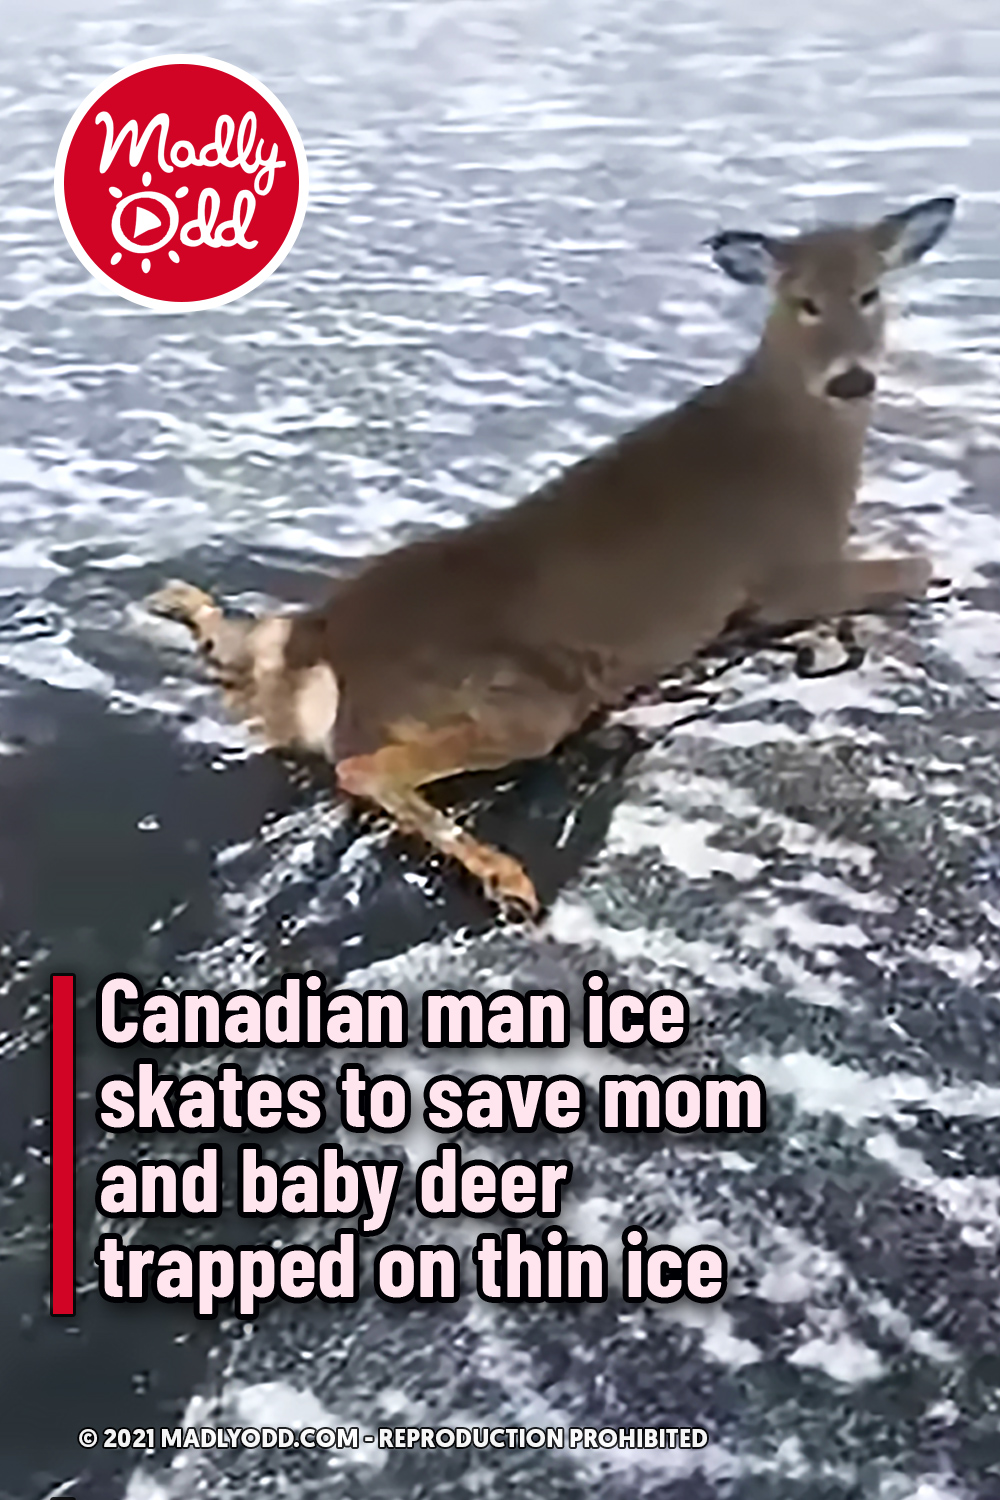 Canadian man ice skates to save mom and baby deer trapped on thin ice